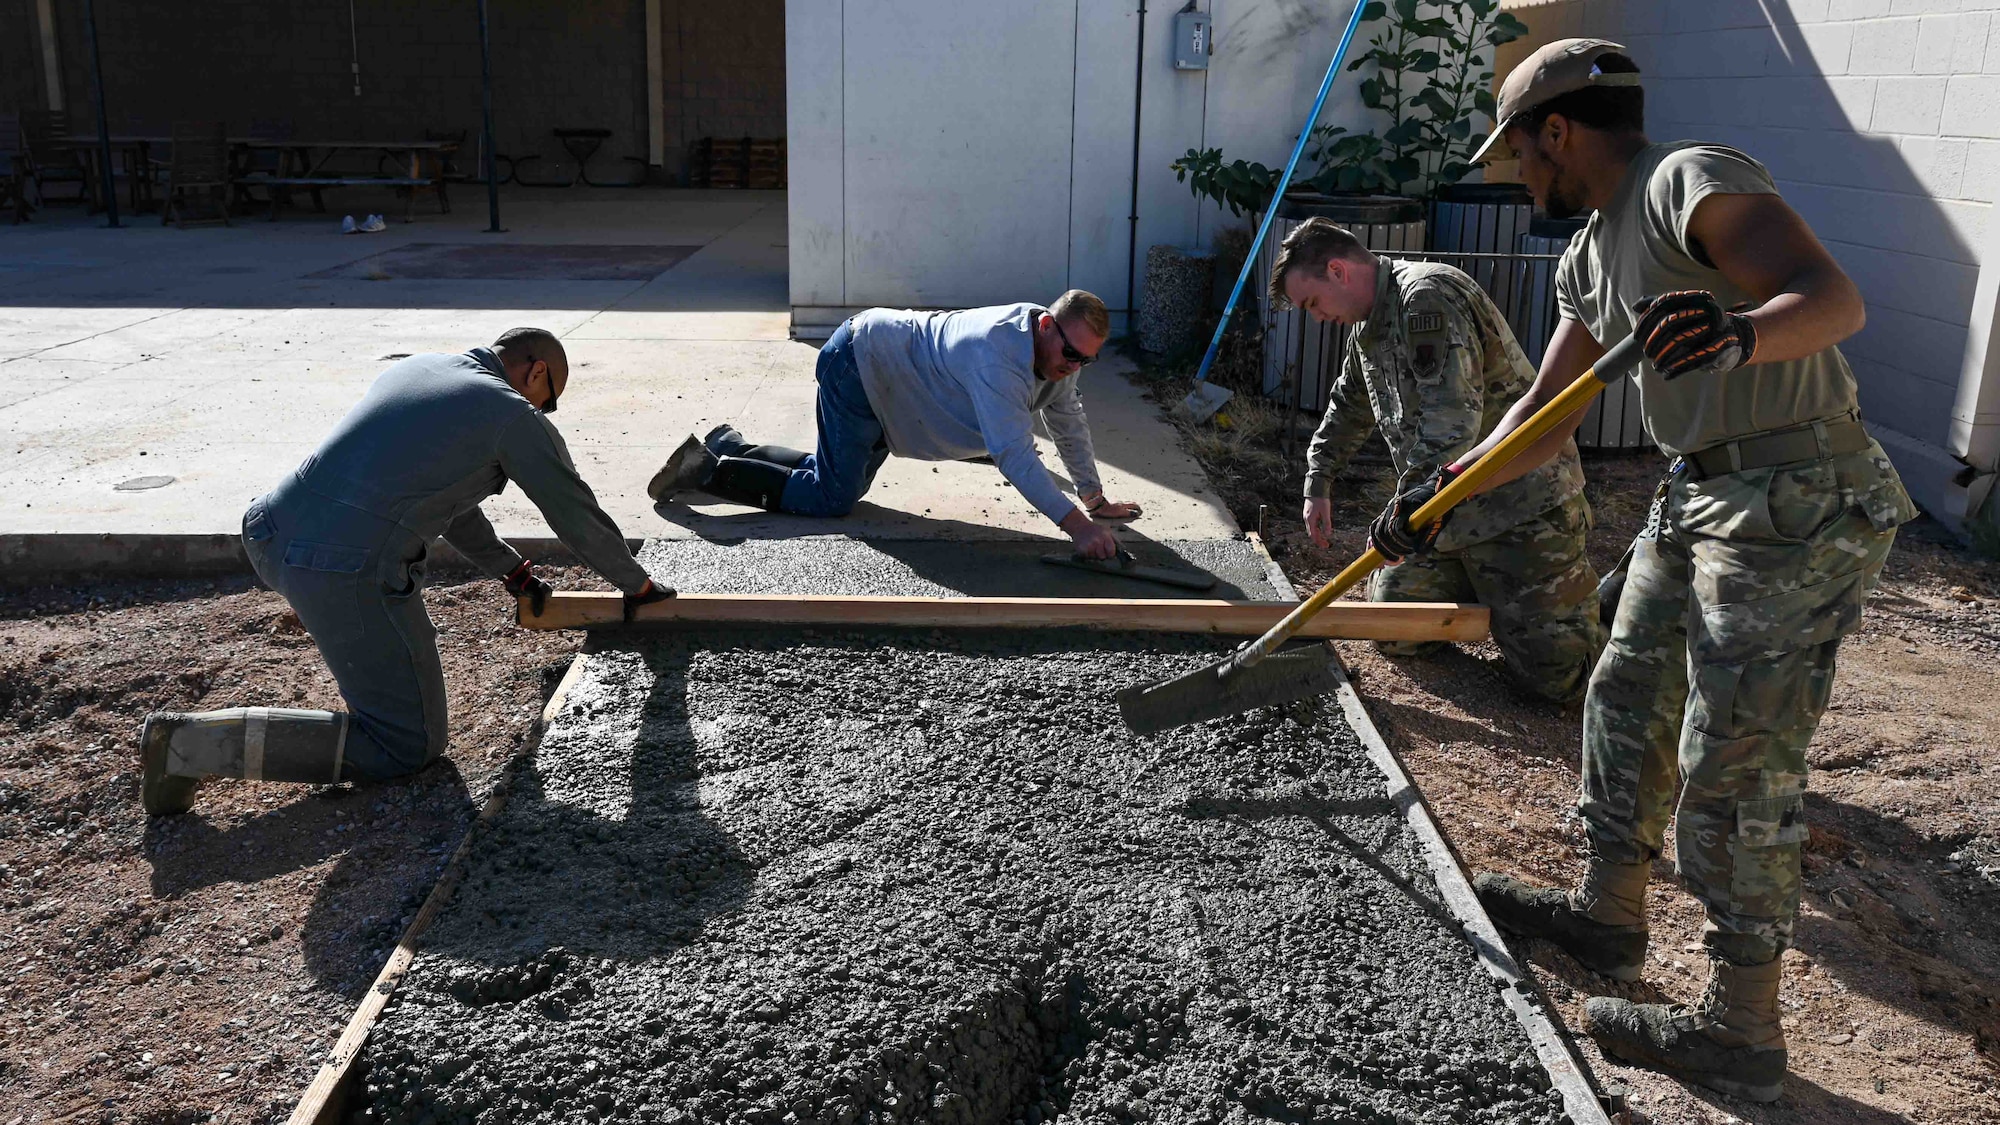 A photo of men in military uniforms leveling out poured concrete.